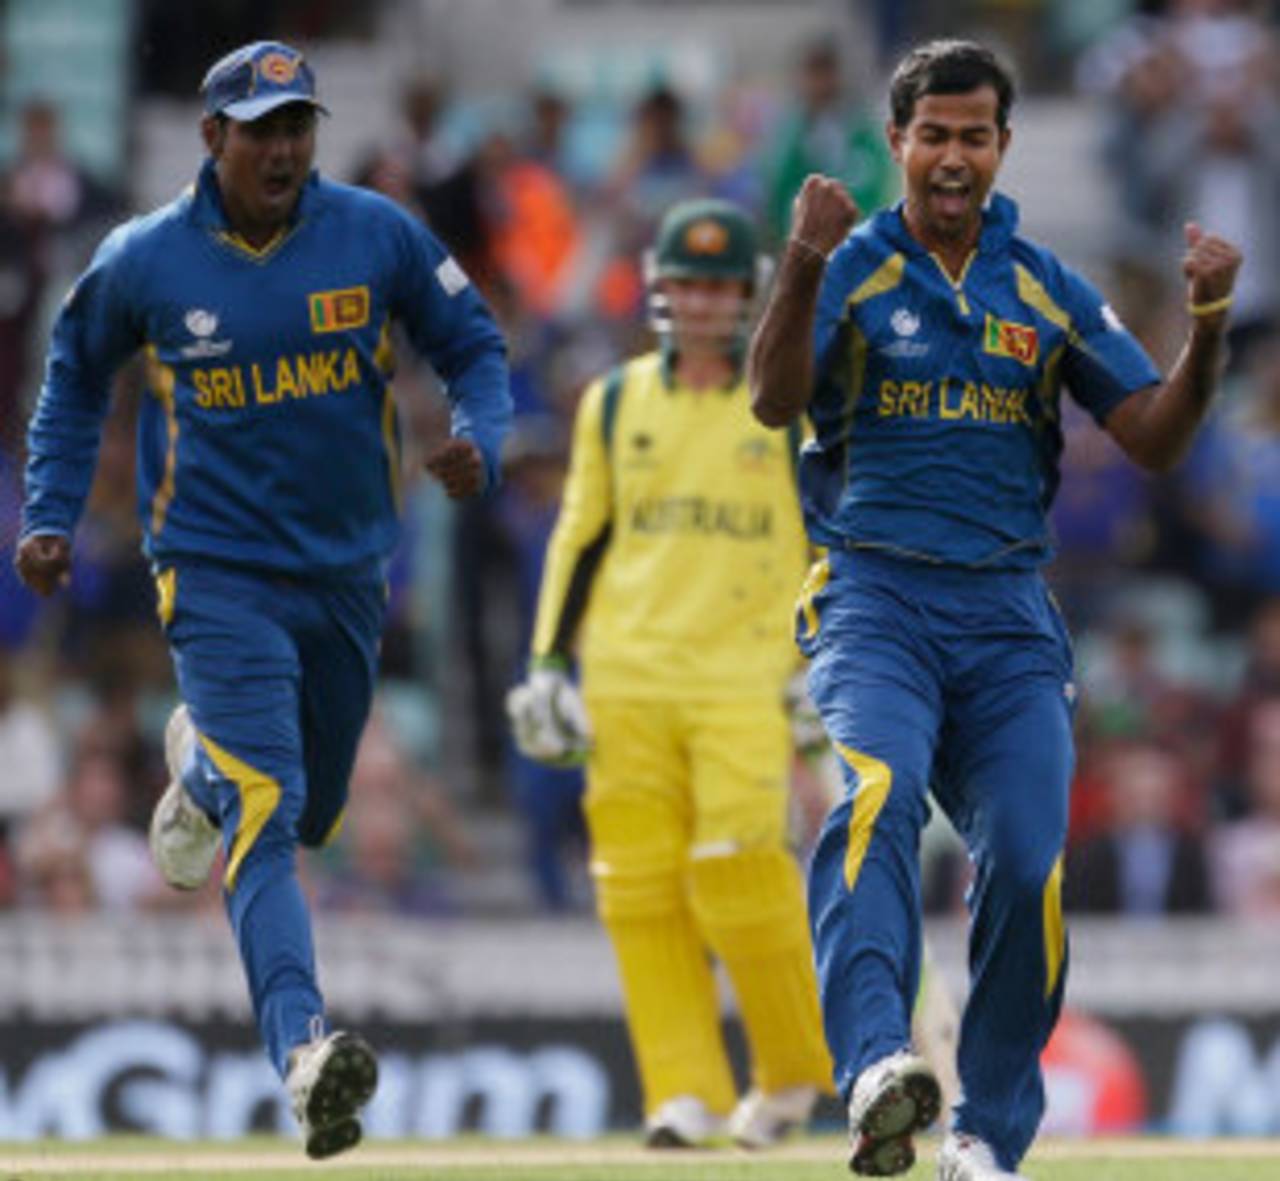 Almost ten years after his ODI debut, Nuwan Kulasekara still approaches the game with the same wonder a million Sri Lankan kids might feel when they play for their country in their imagination&nbsp;&nbsp;&bull;&nbsp;&nbsp;Associated Press